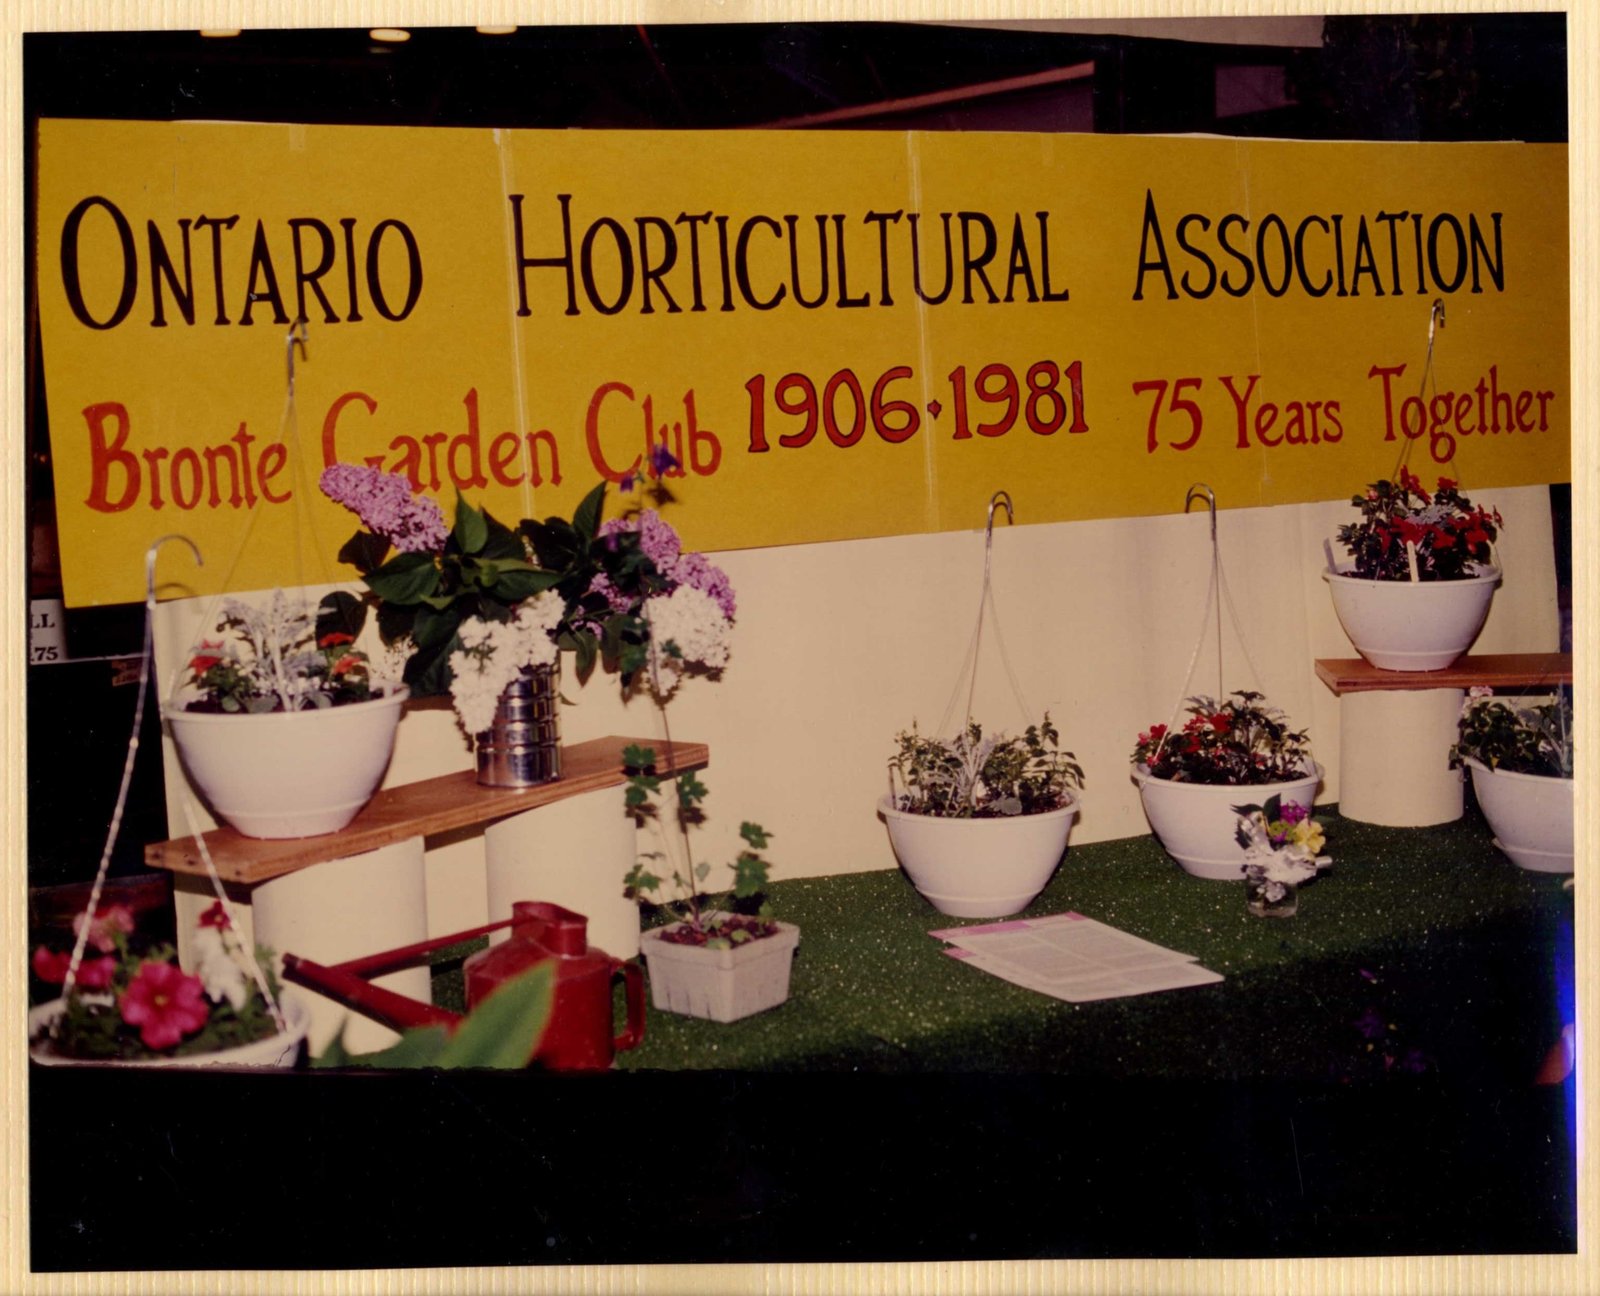 Ontario Horticultural Association & Bronte Garden Club, 75 Years Together